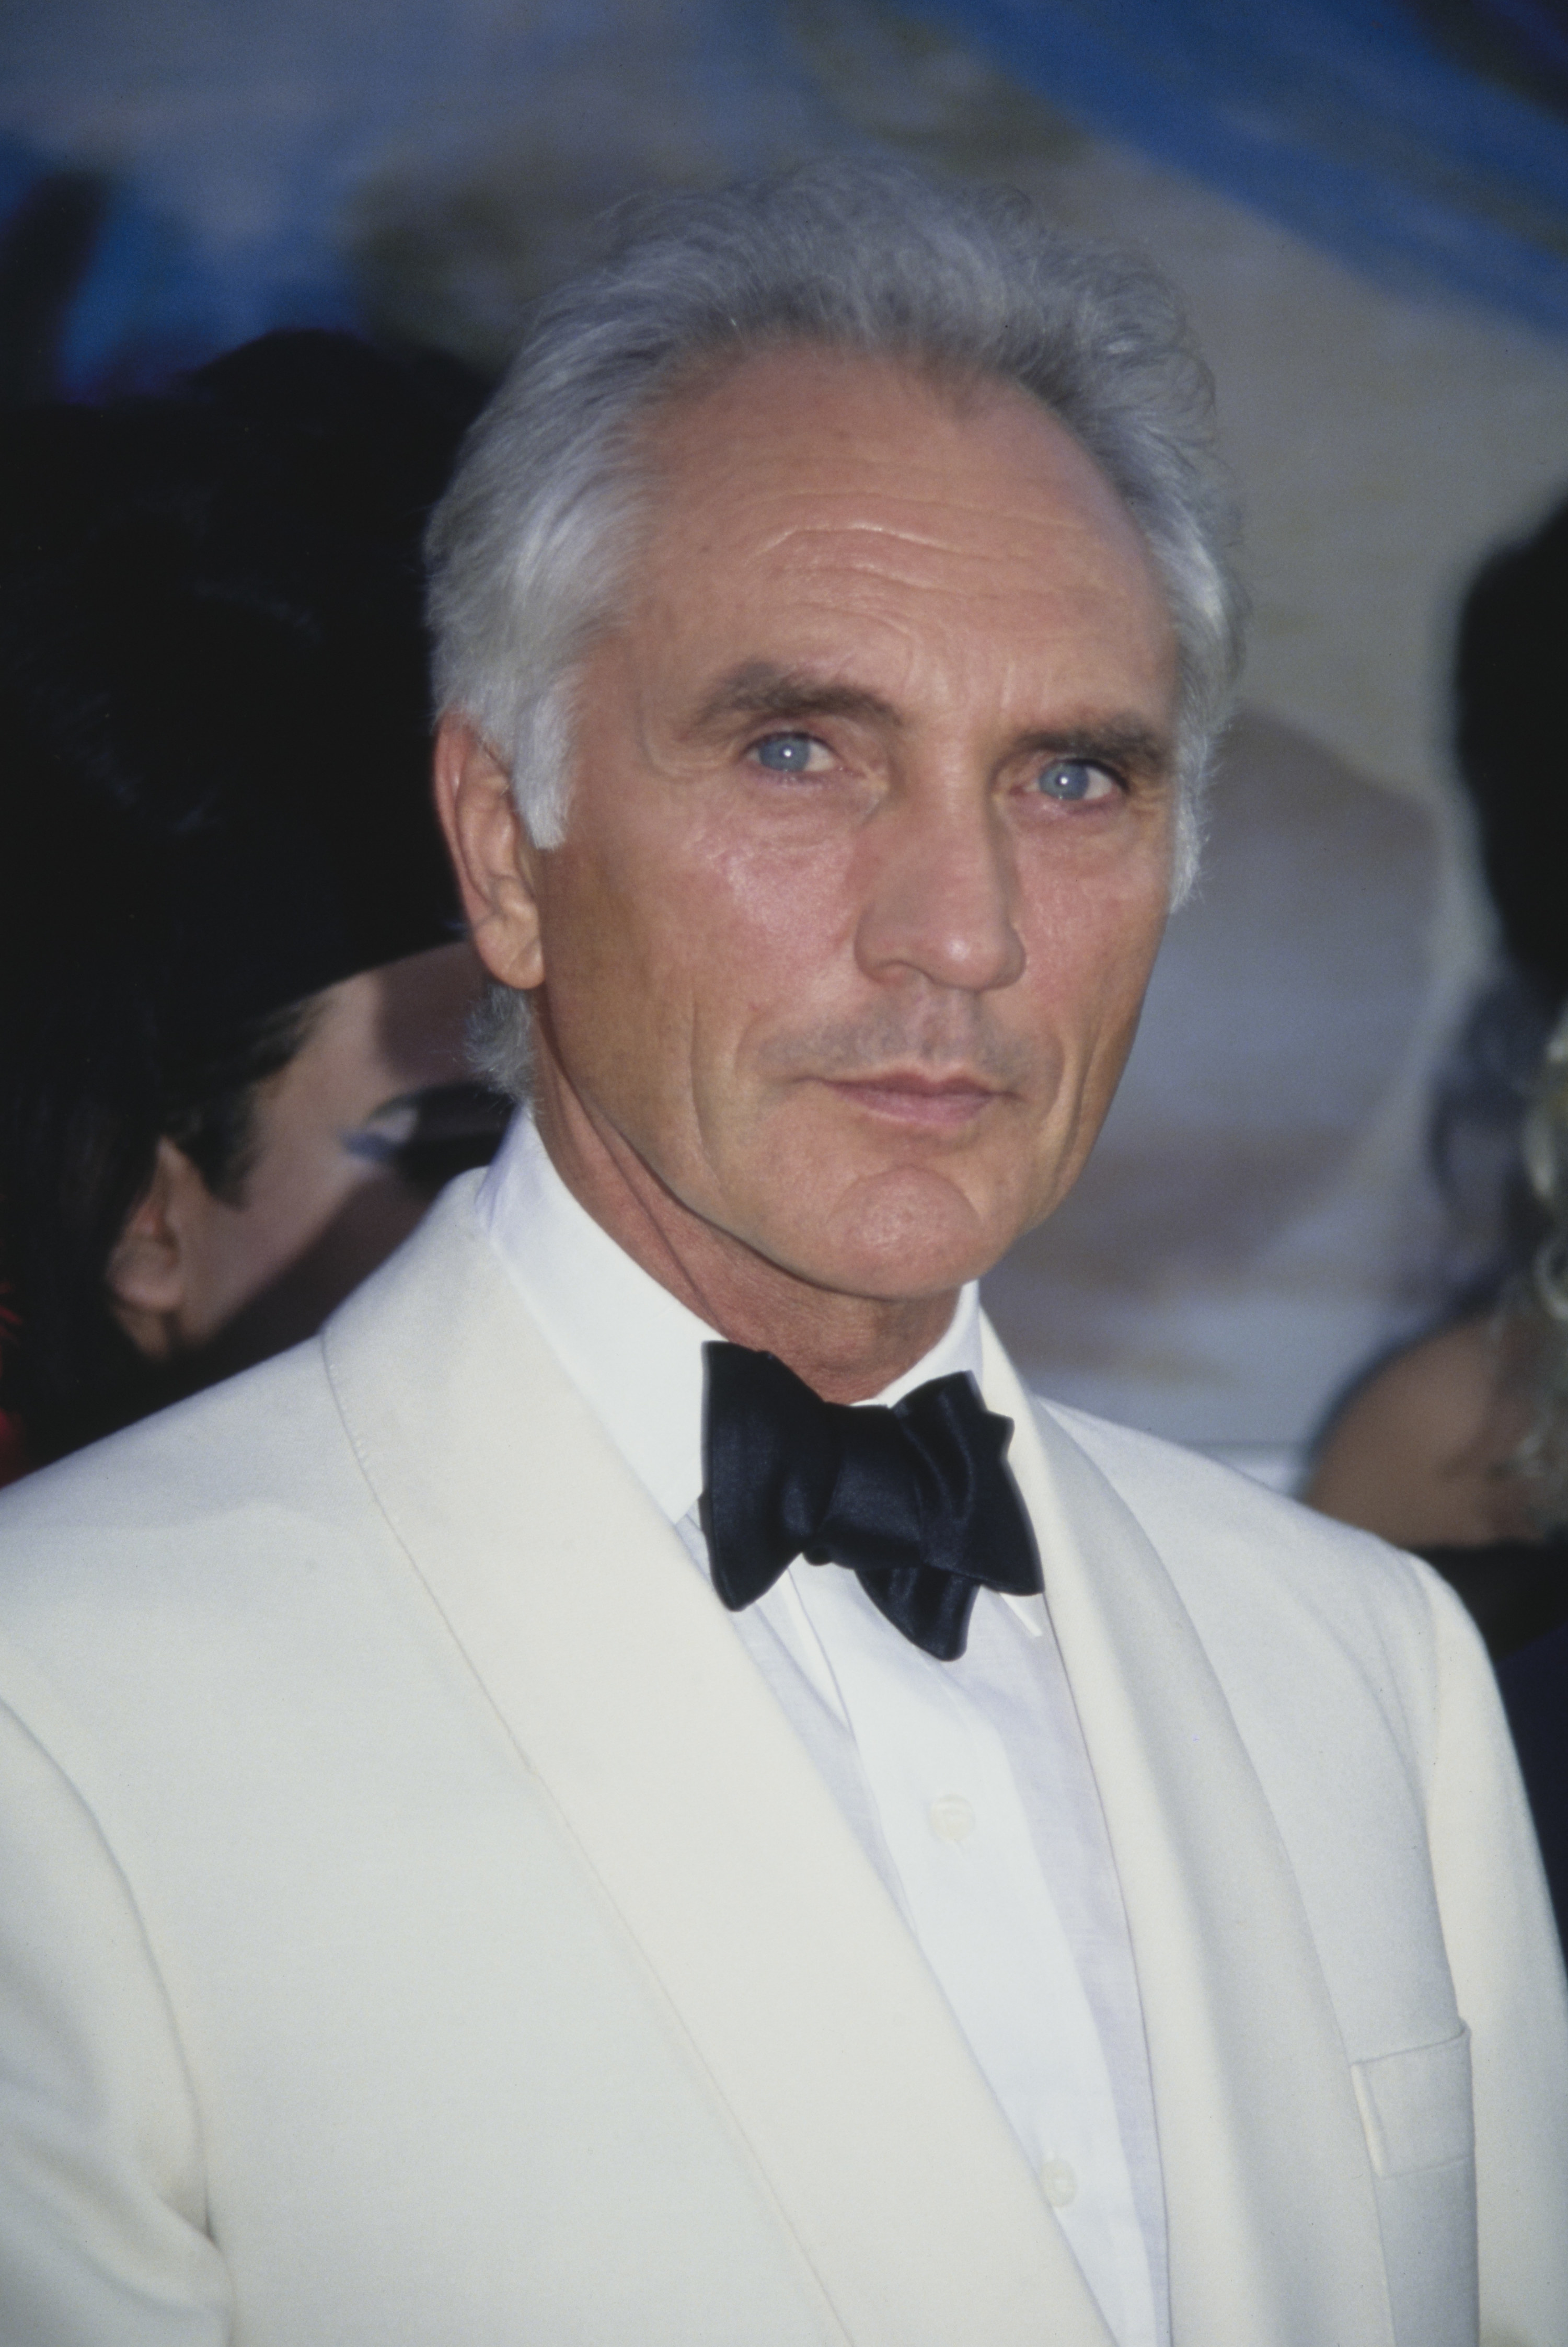 Terrence wearing a white suit with a black bow tie, looking at the camera